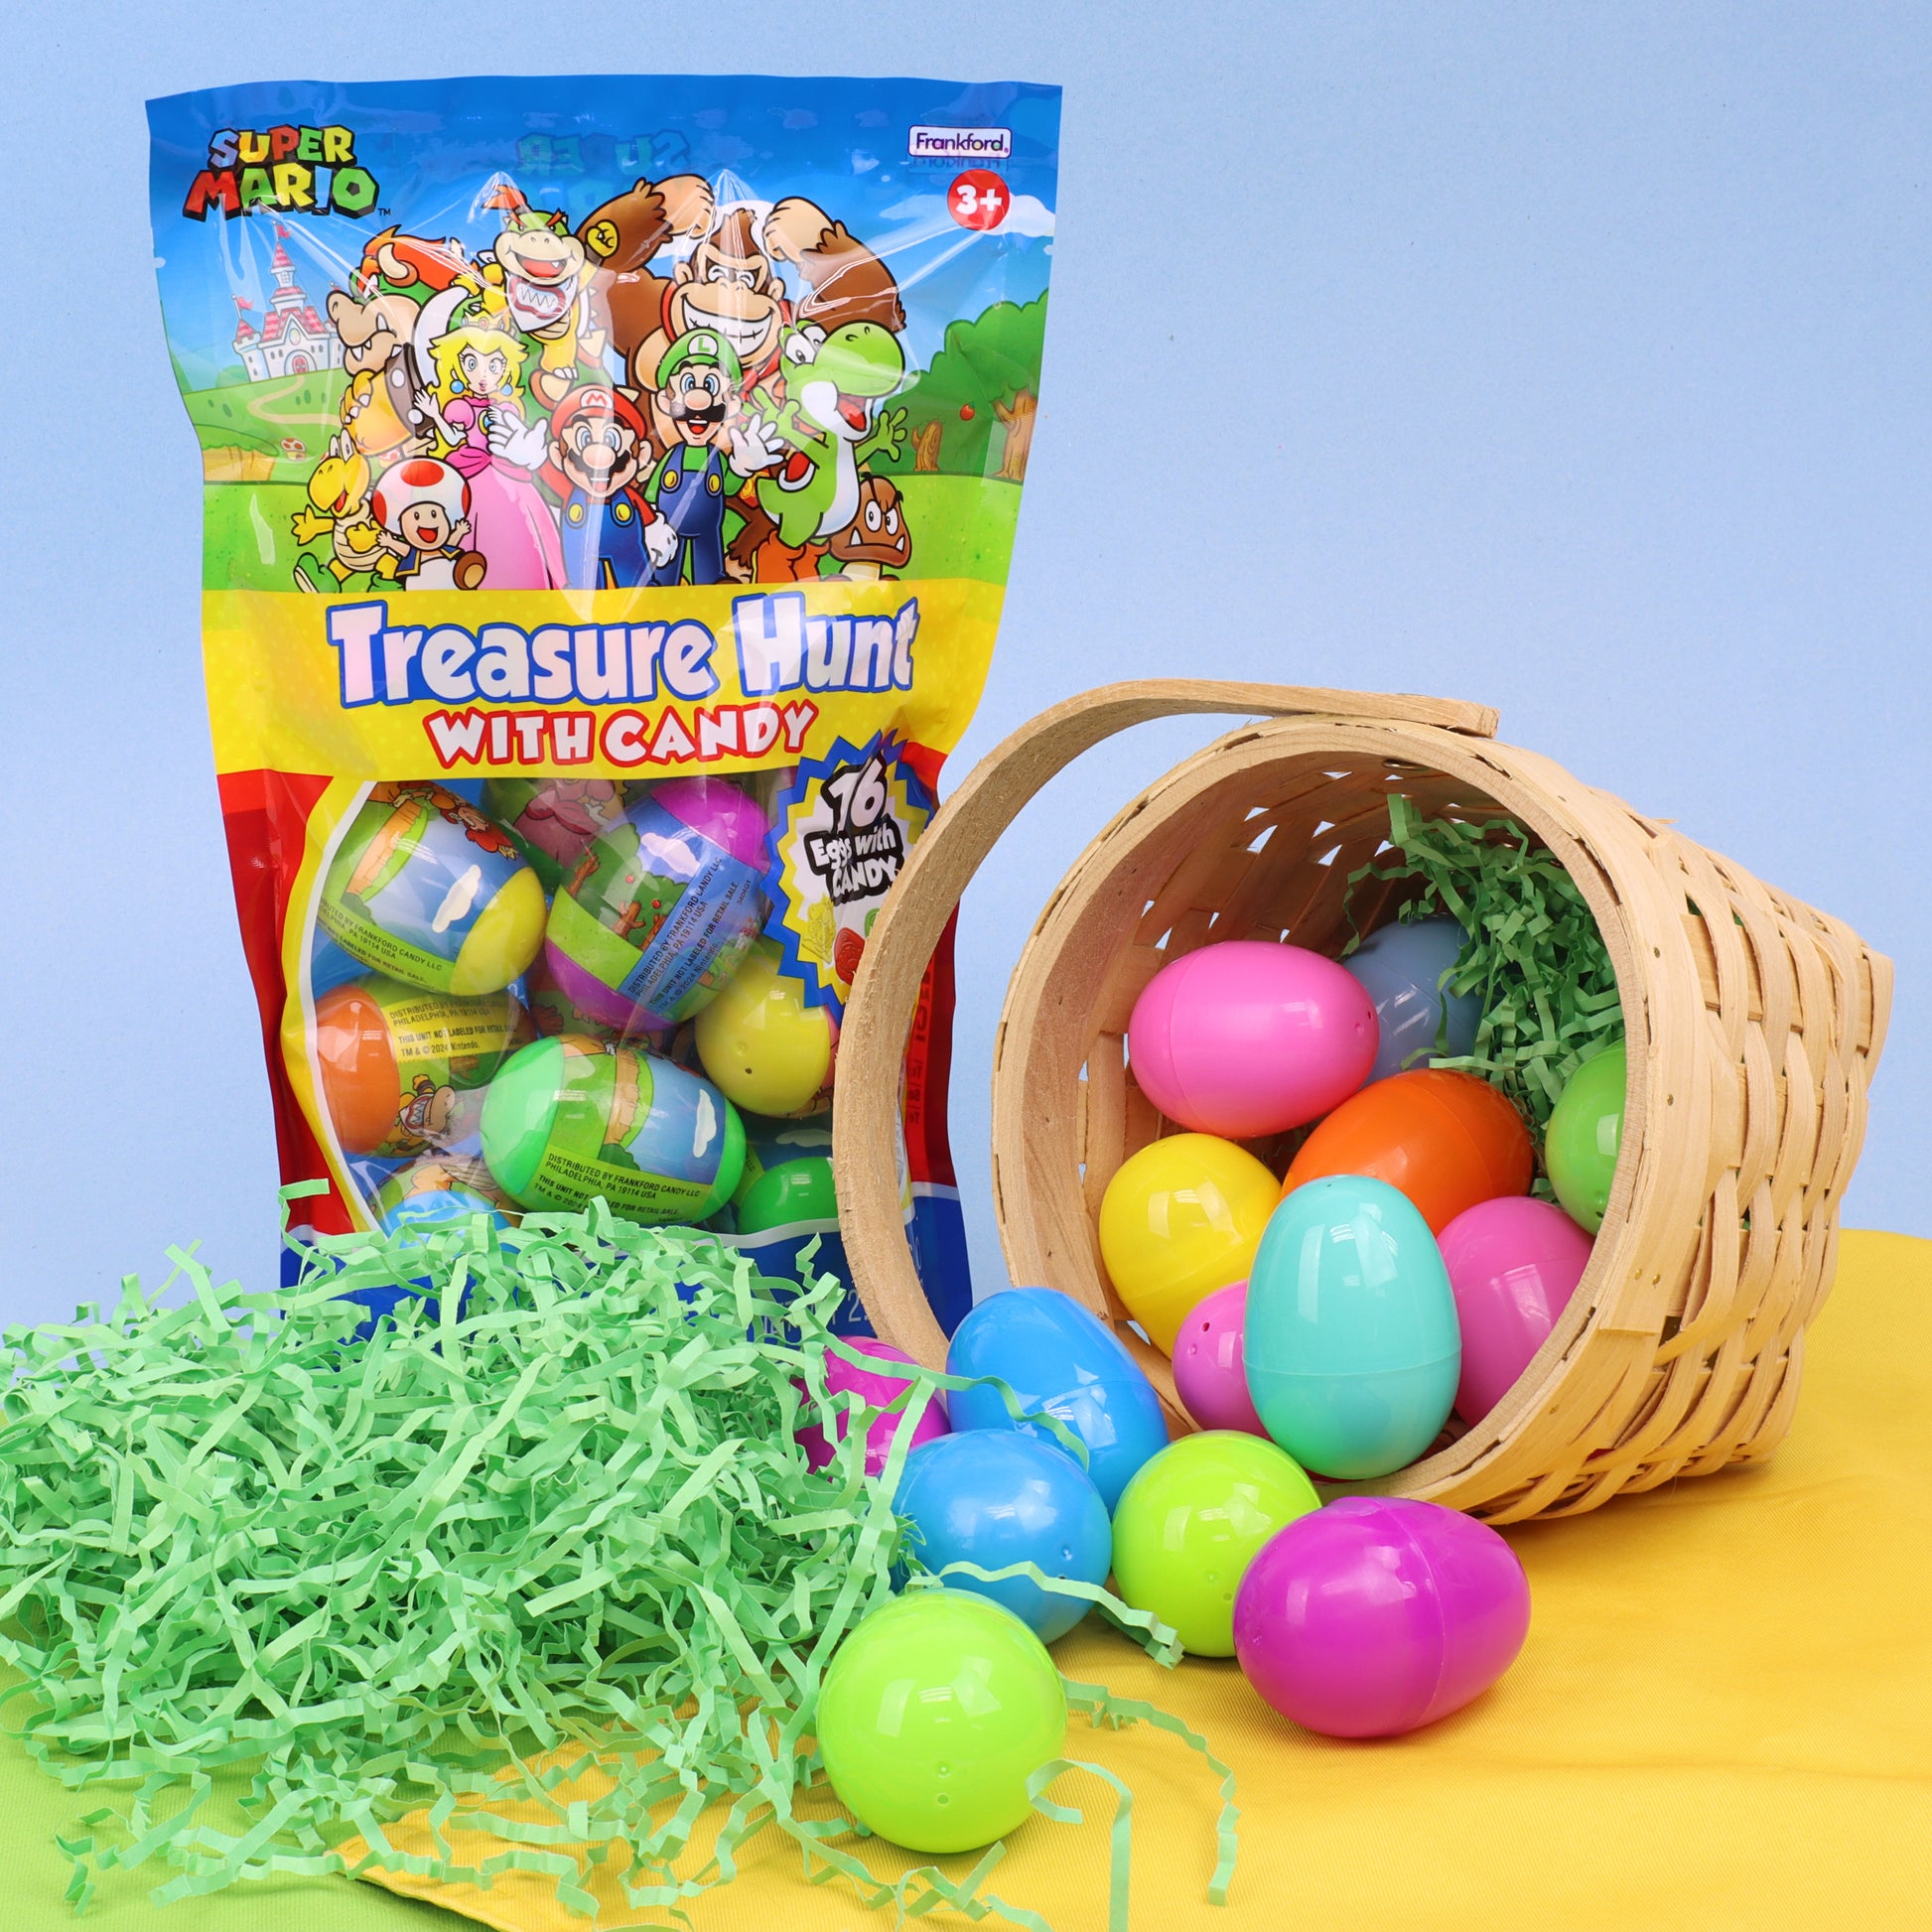 colorful bag with mario characters filled with plastic eggs filled with gummy candy and a basket of colorful plastic eggs